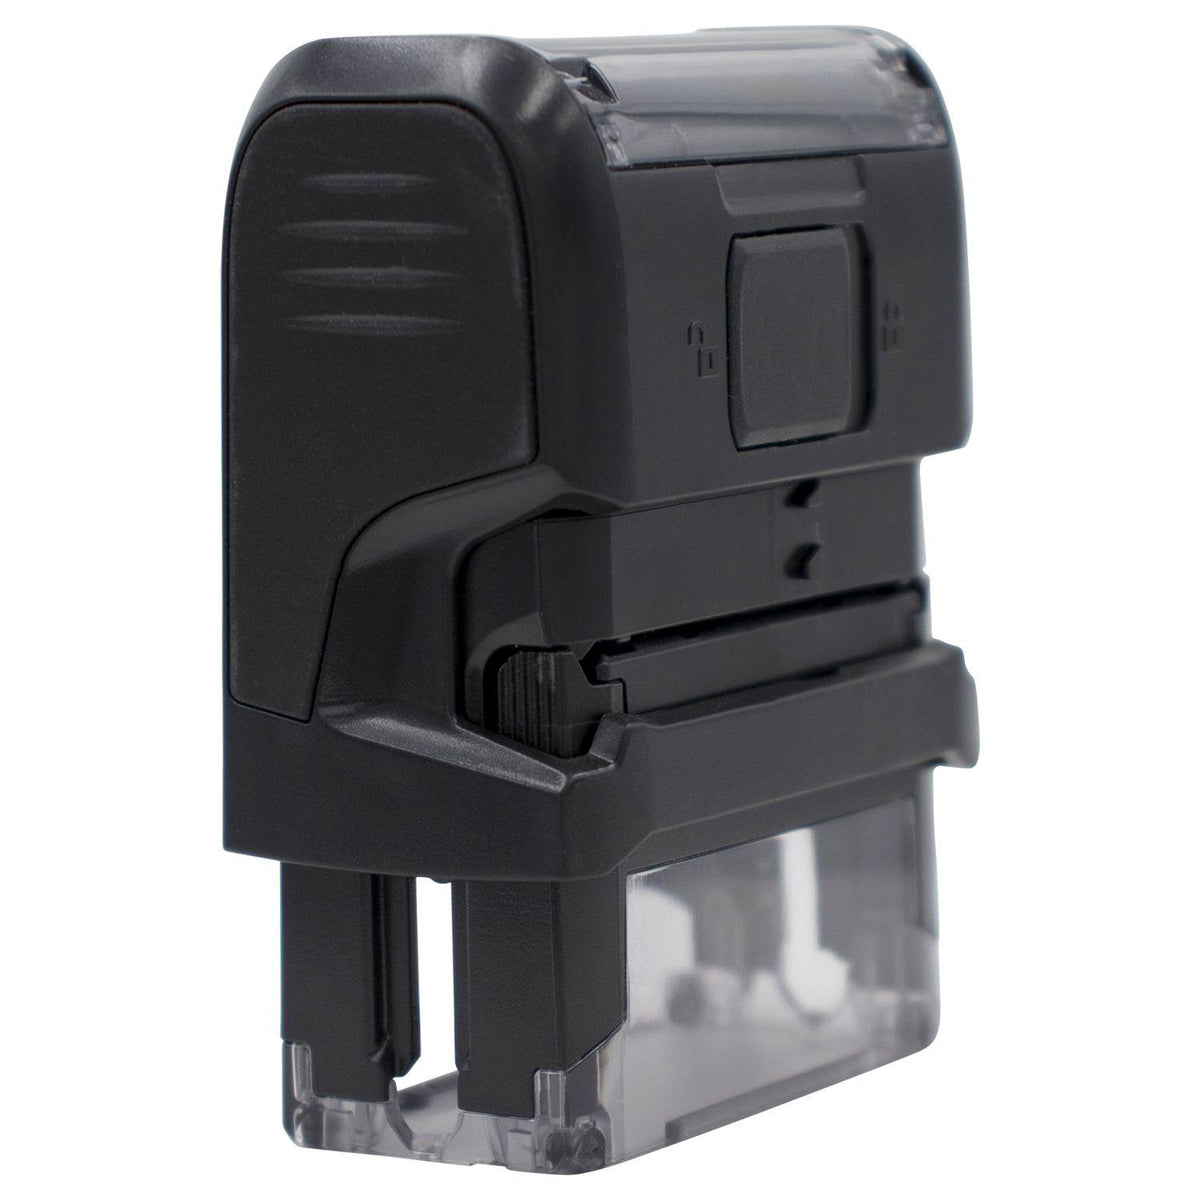 Self-Inking Expreso Stamp - Engineer Seal Stamps - Brand_Trodat, Impression Size_Small, Stamp Type_Self-Inking Stamp, Type of Use_General, Type of Use_Office